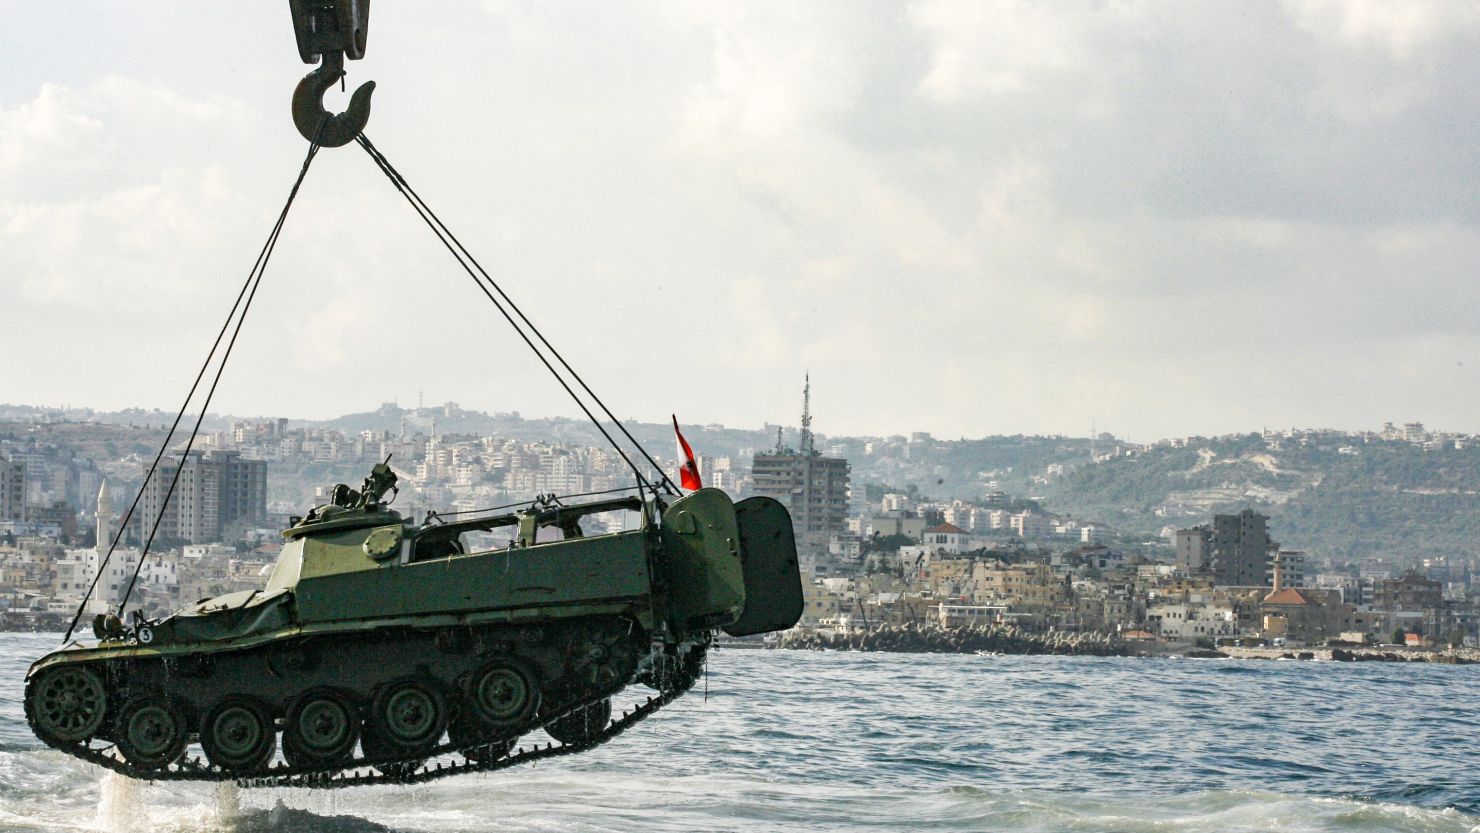 Old army tanks are being used to create an aqua park in the Mediterranean near Sidon, Lebanon.